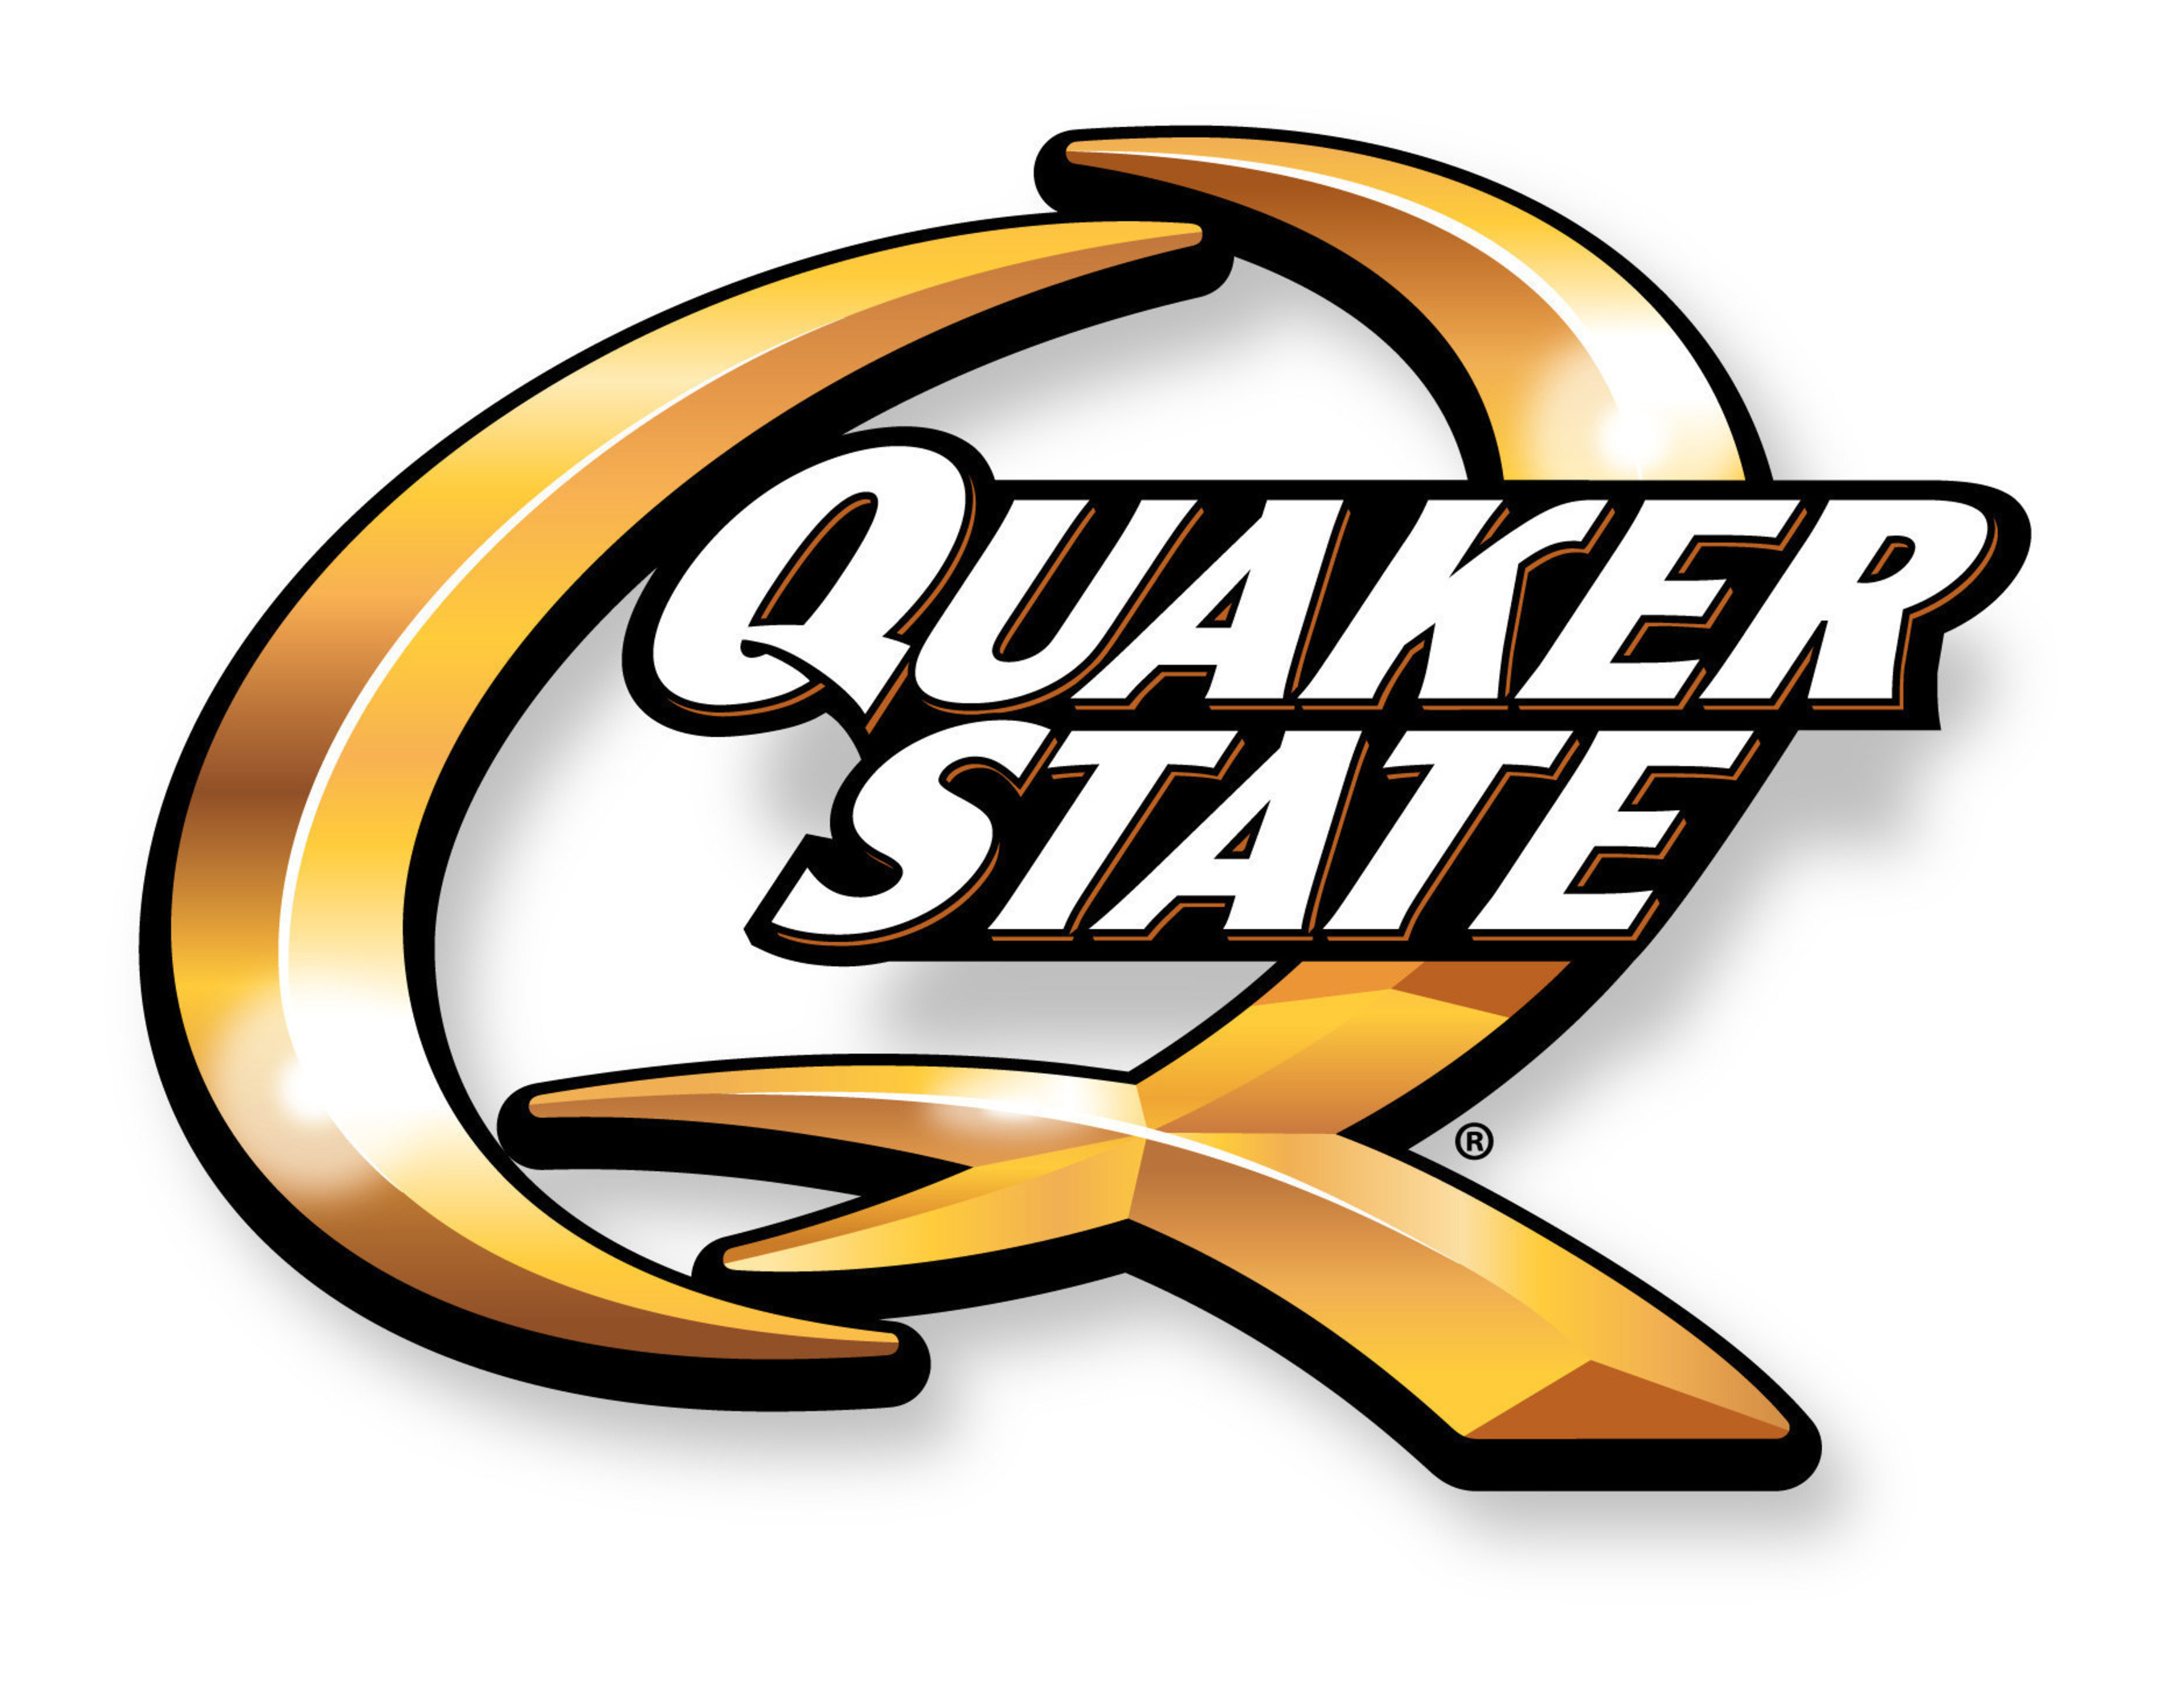 Quaker State Motor Oil Brings Back Best In Class Challenge For High School Auto Shop Students